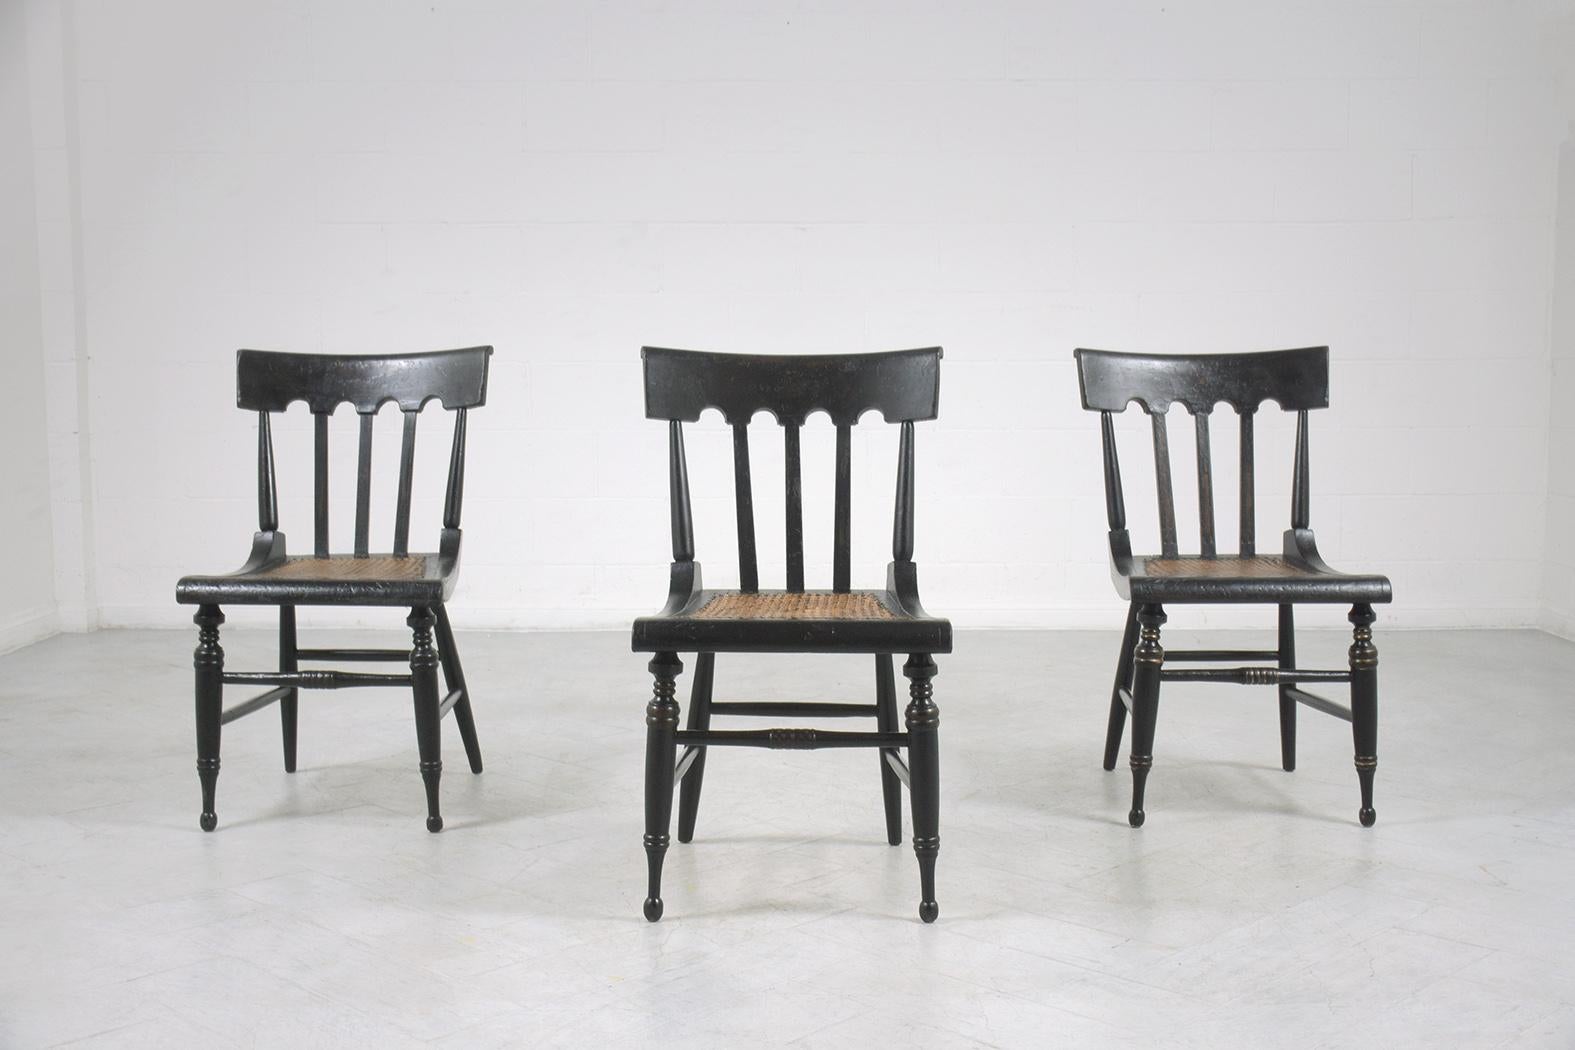 An extraordinary set of six dining chairs is hand-crafted out of wood and has been newly restored by our team of expert craftsmen. This fabulous set of antique dining chairs features curved back stretched legs painted in ebonized color caning seats